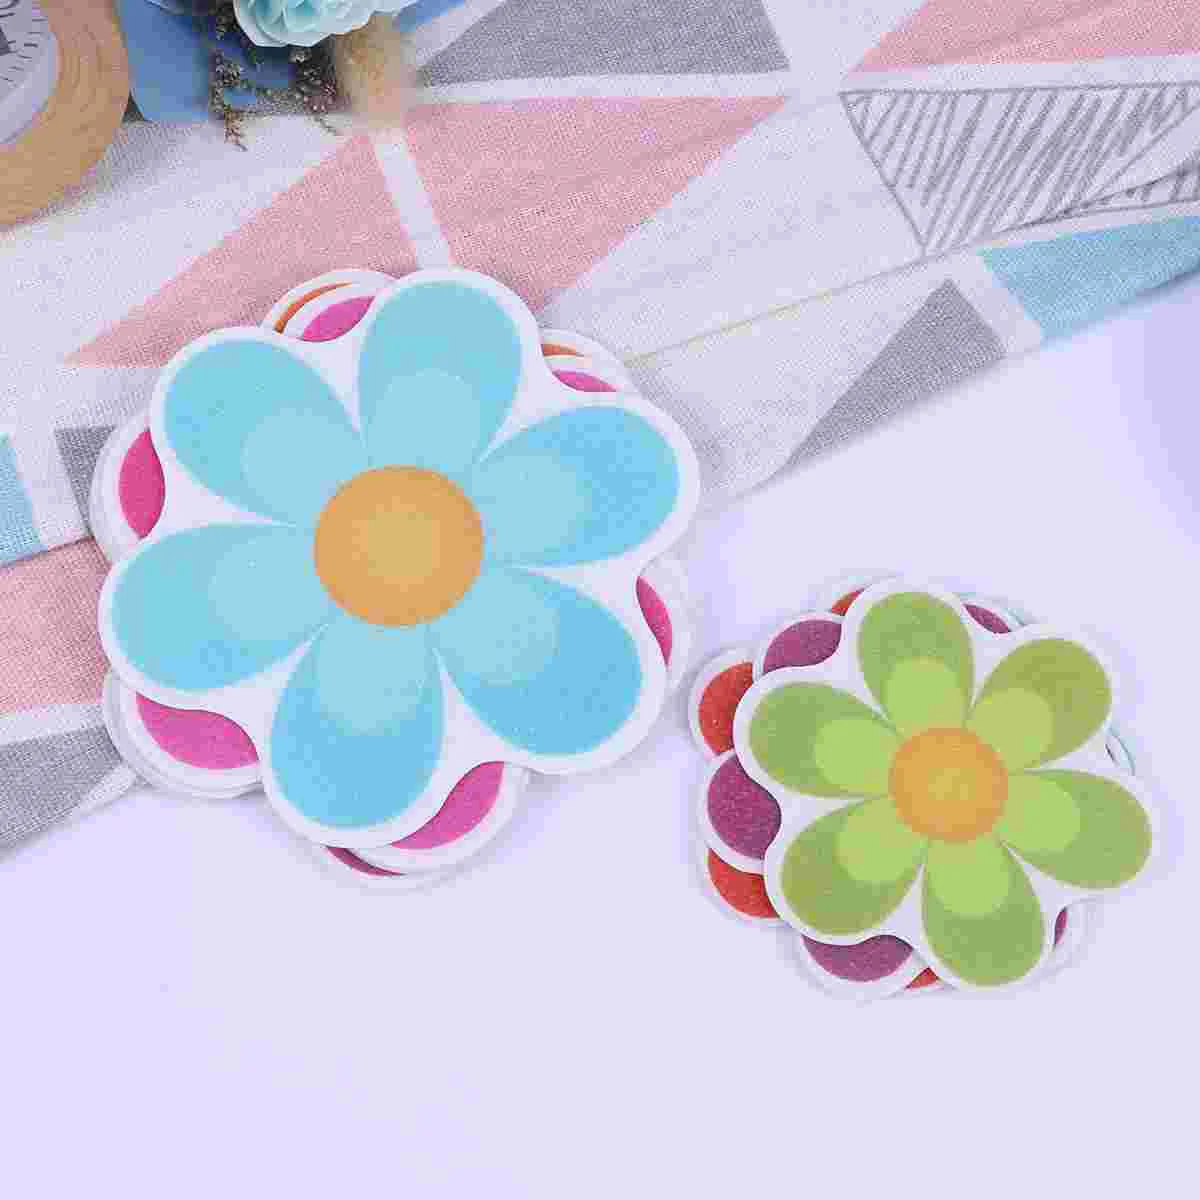 

10pcs Flower Anti Stickers Colorful Self Adhesive PEVA Decal for Nonslip Rug Bathtub Shower Surfaces